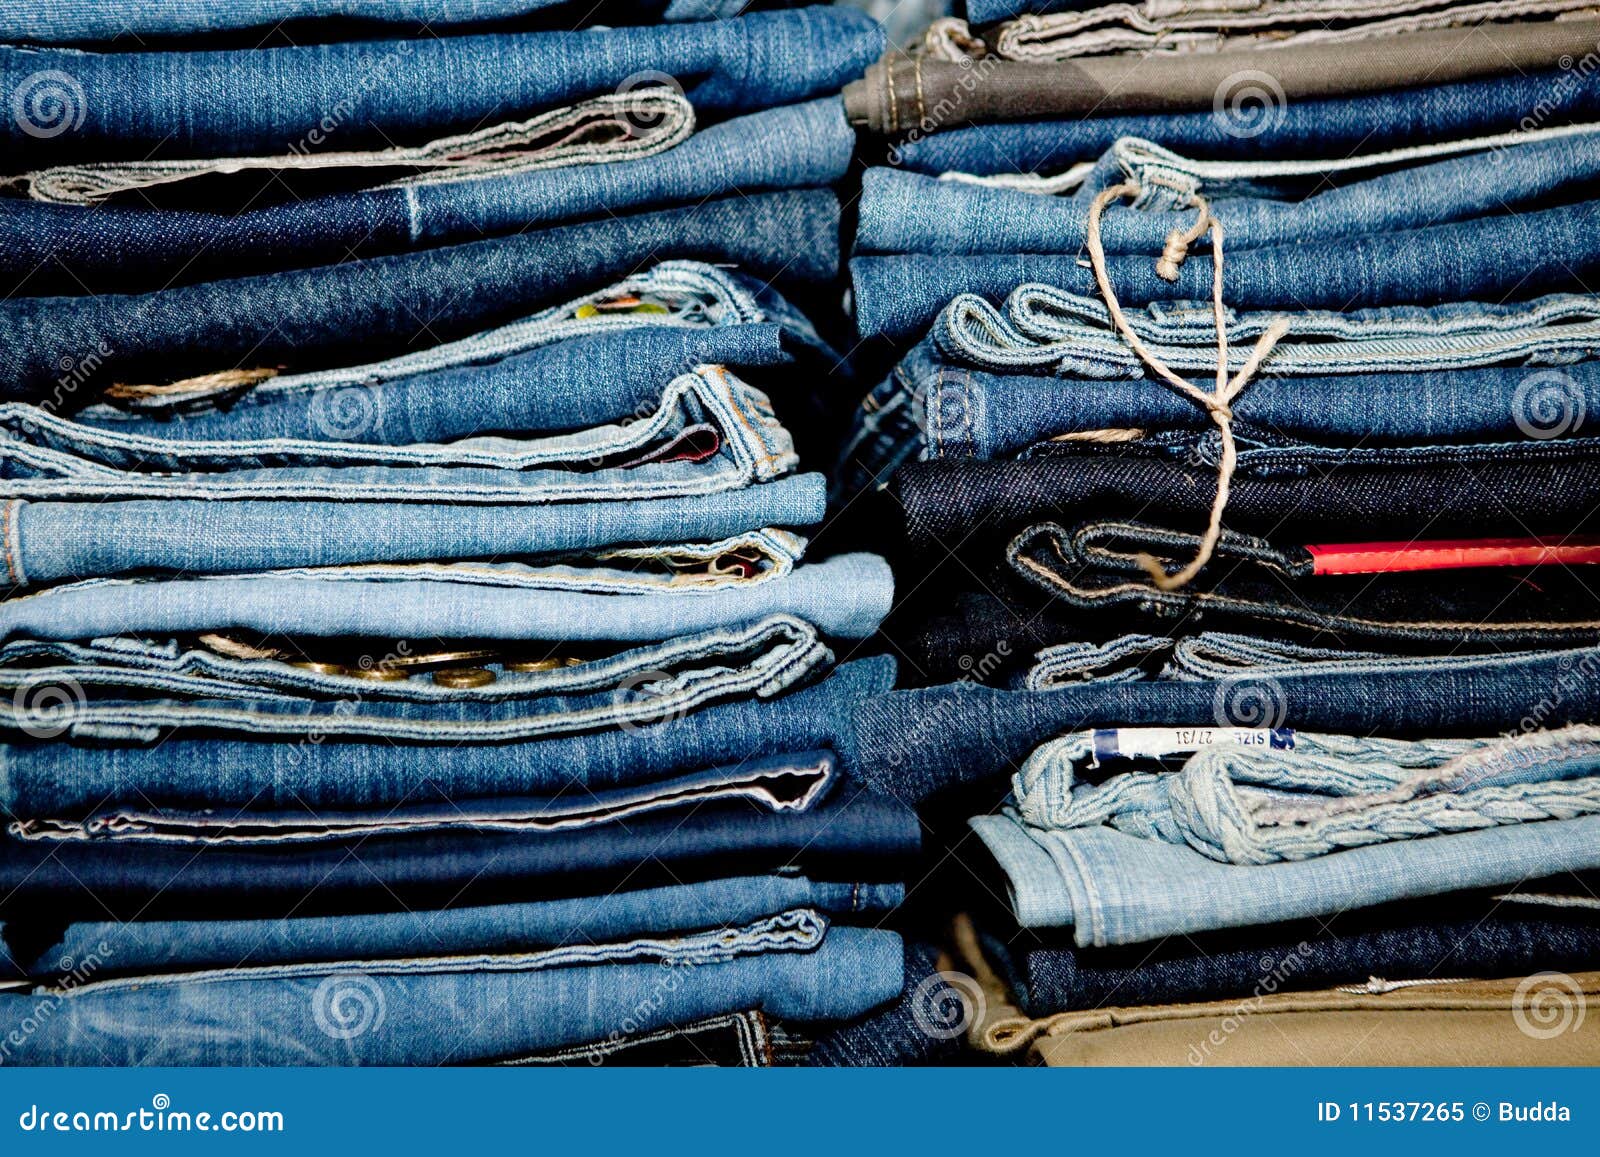 Jeans stack stock image. Image of group, fashion, style - 11537265